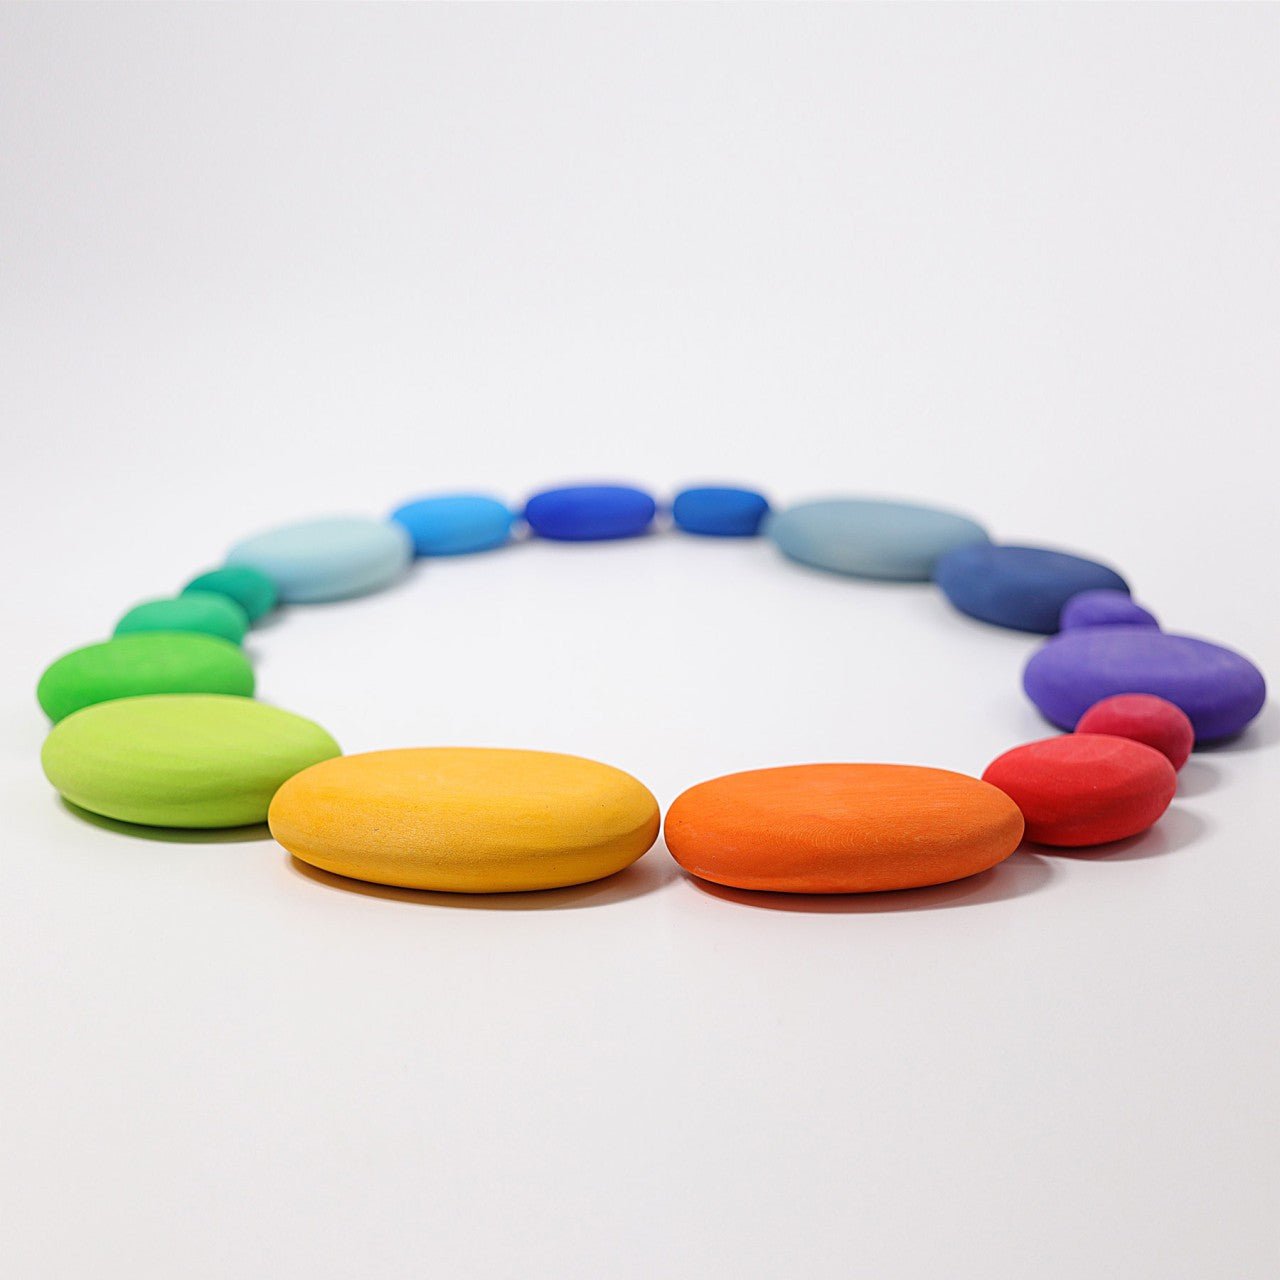 GRIMM'S | PEBBLES - RIVER by GRIMM'S WOODEN TOYS - The Playful Collective